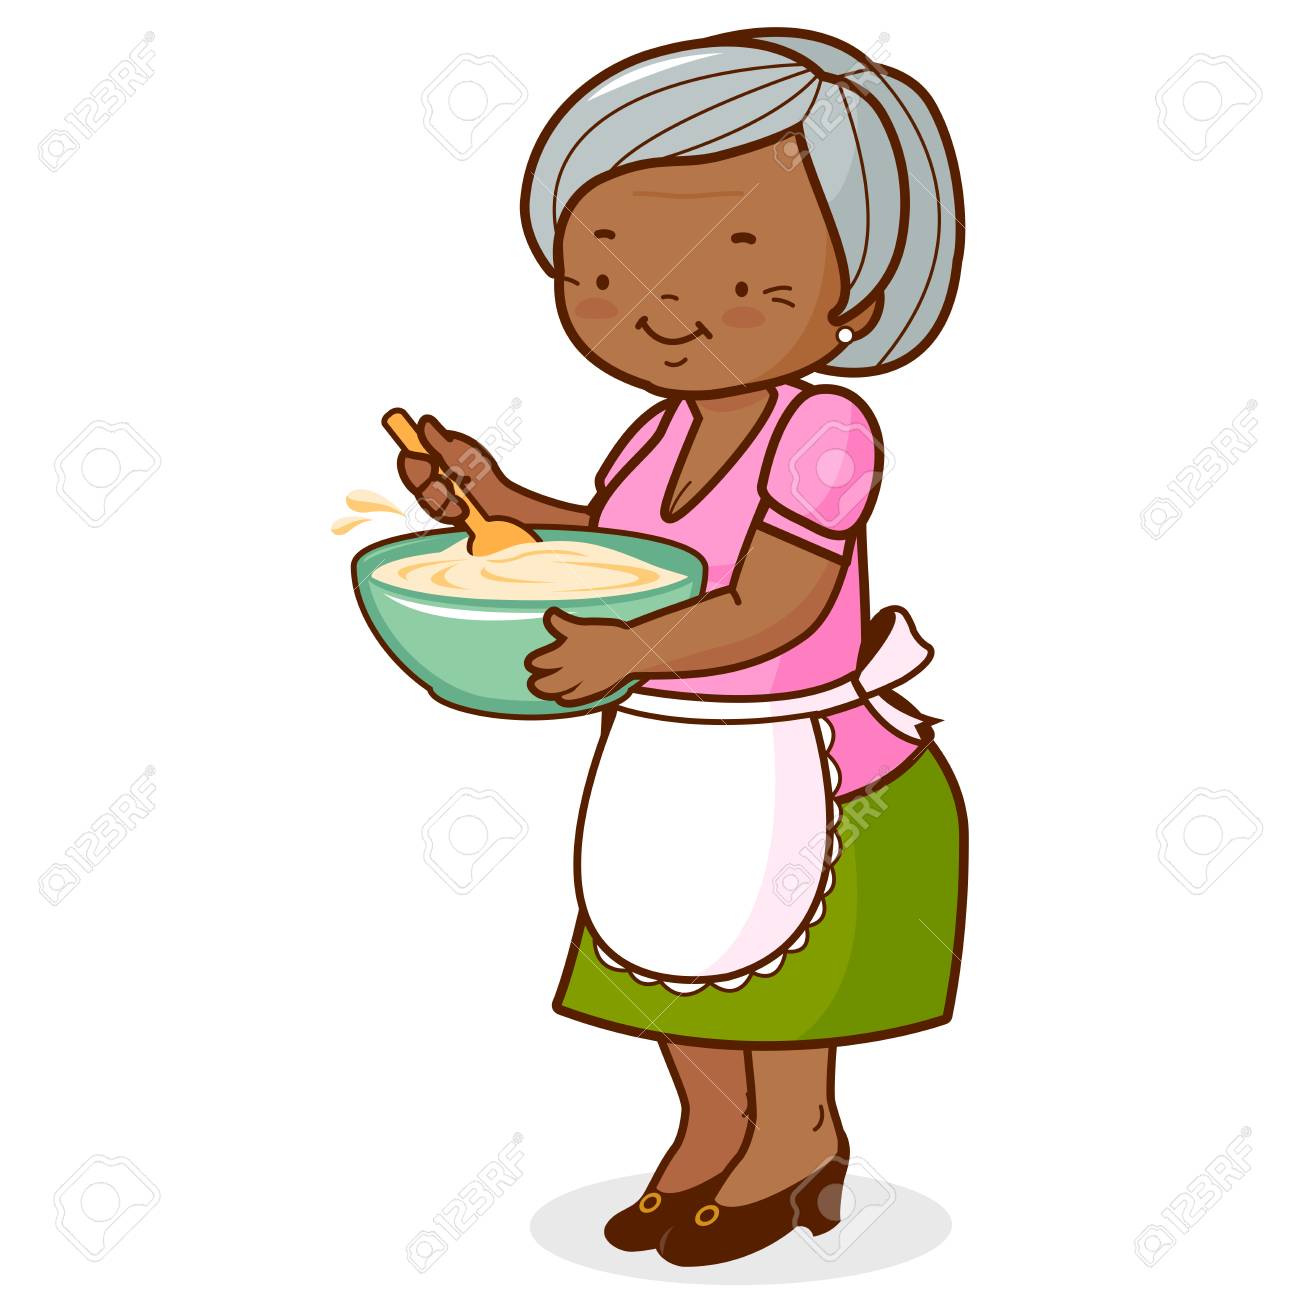 An old black woman, holding a bowl and cooking. Vector illustration.